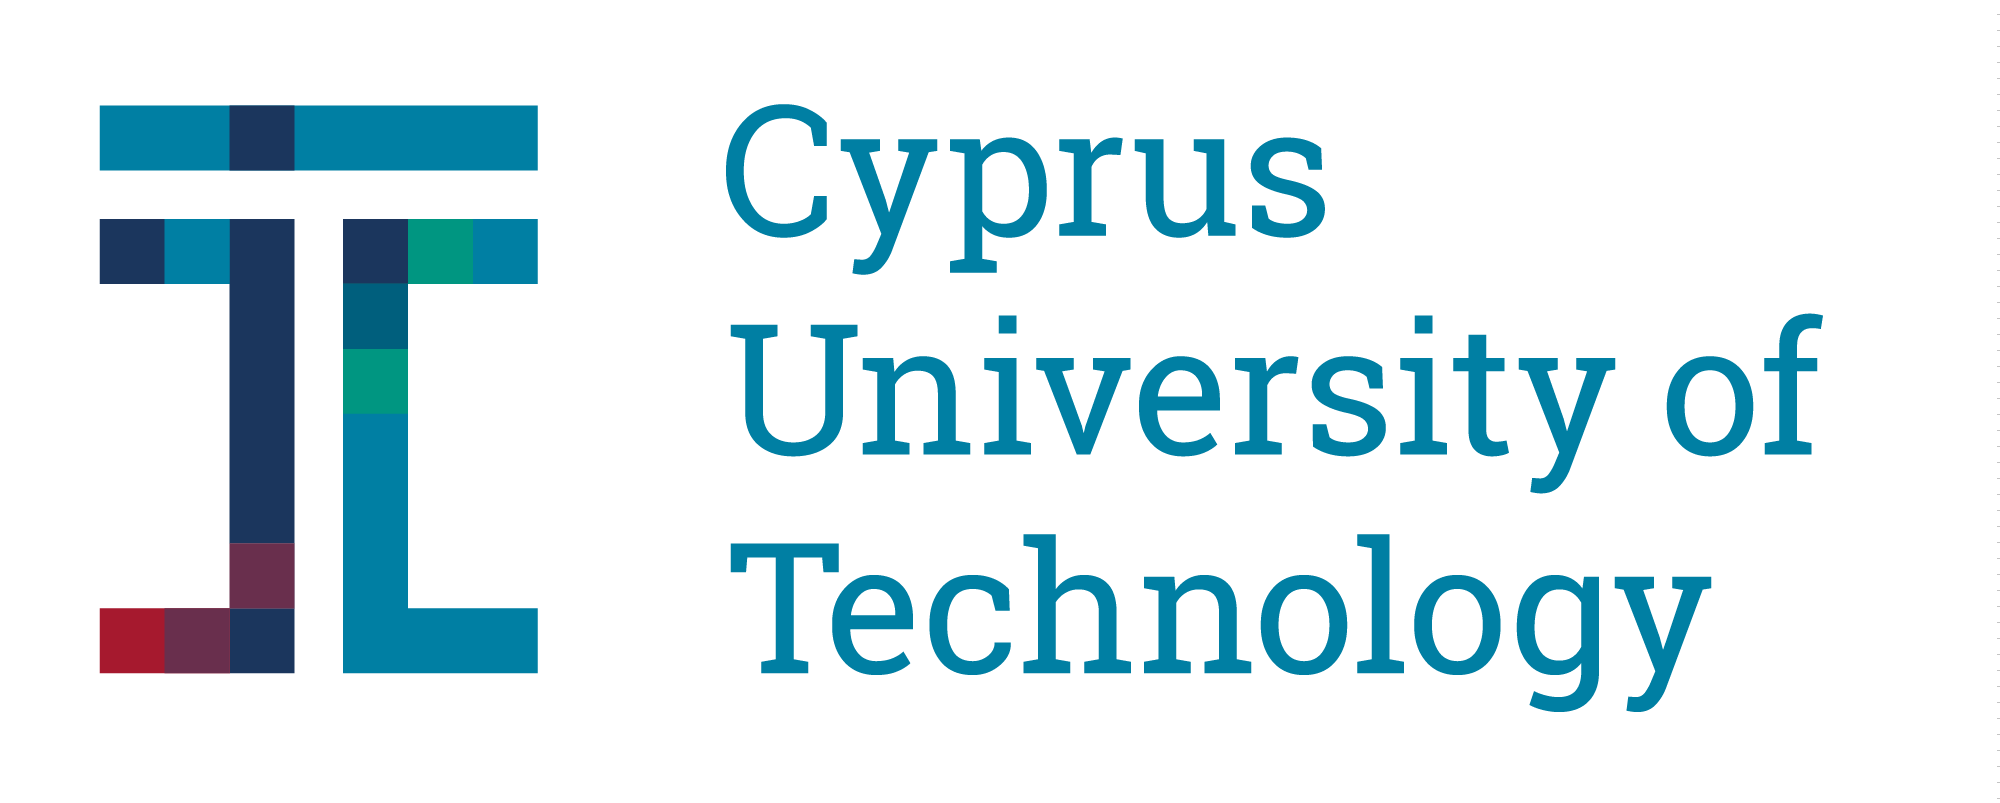 Cut Logo - Cyprus University of Technology official logo.png